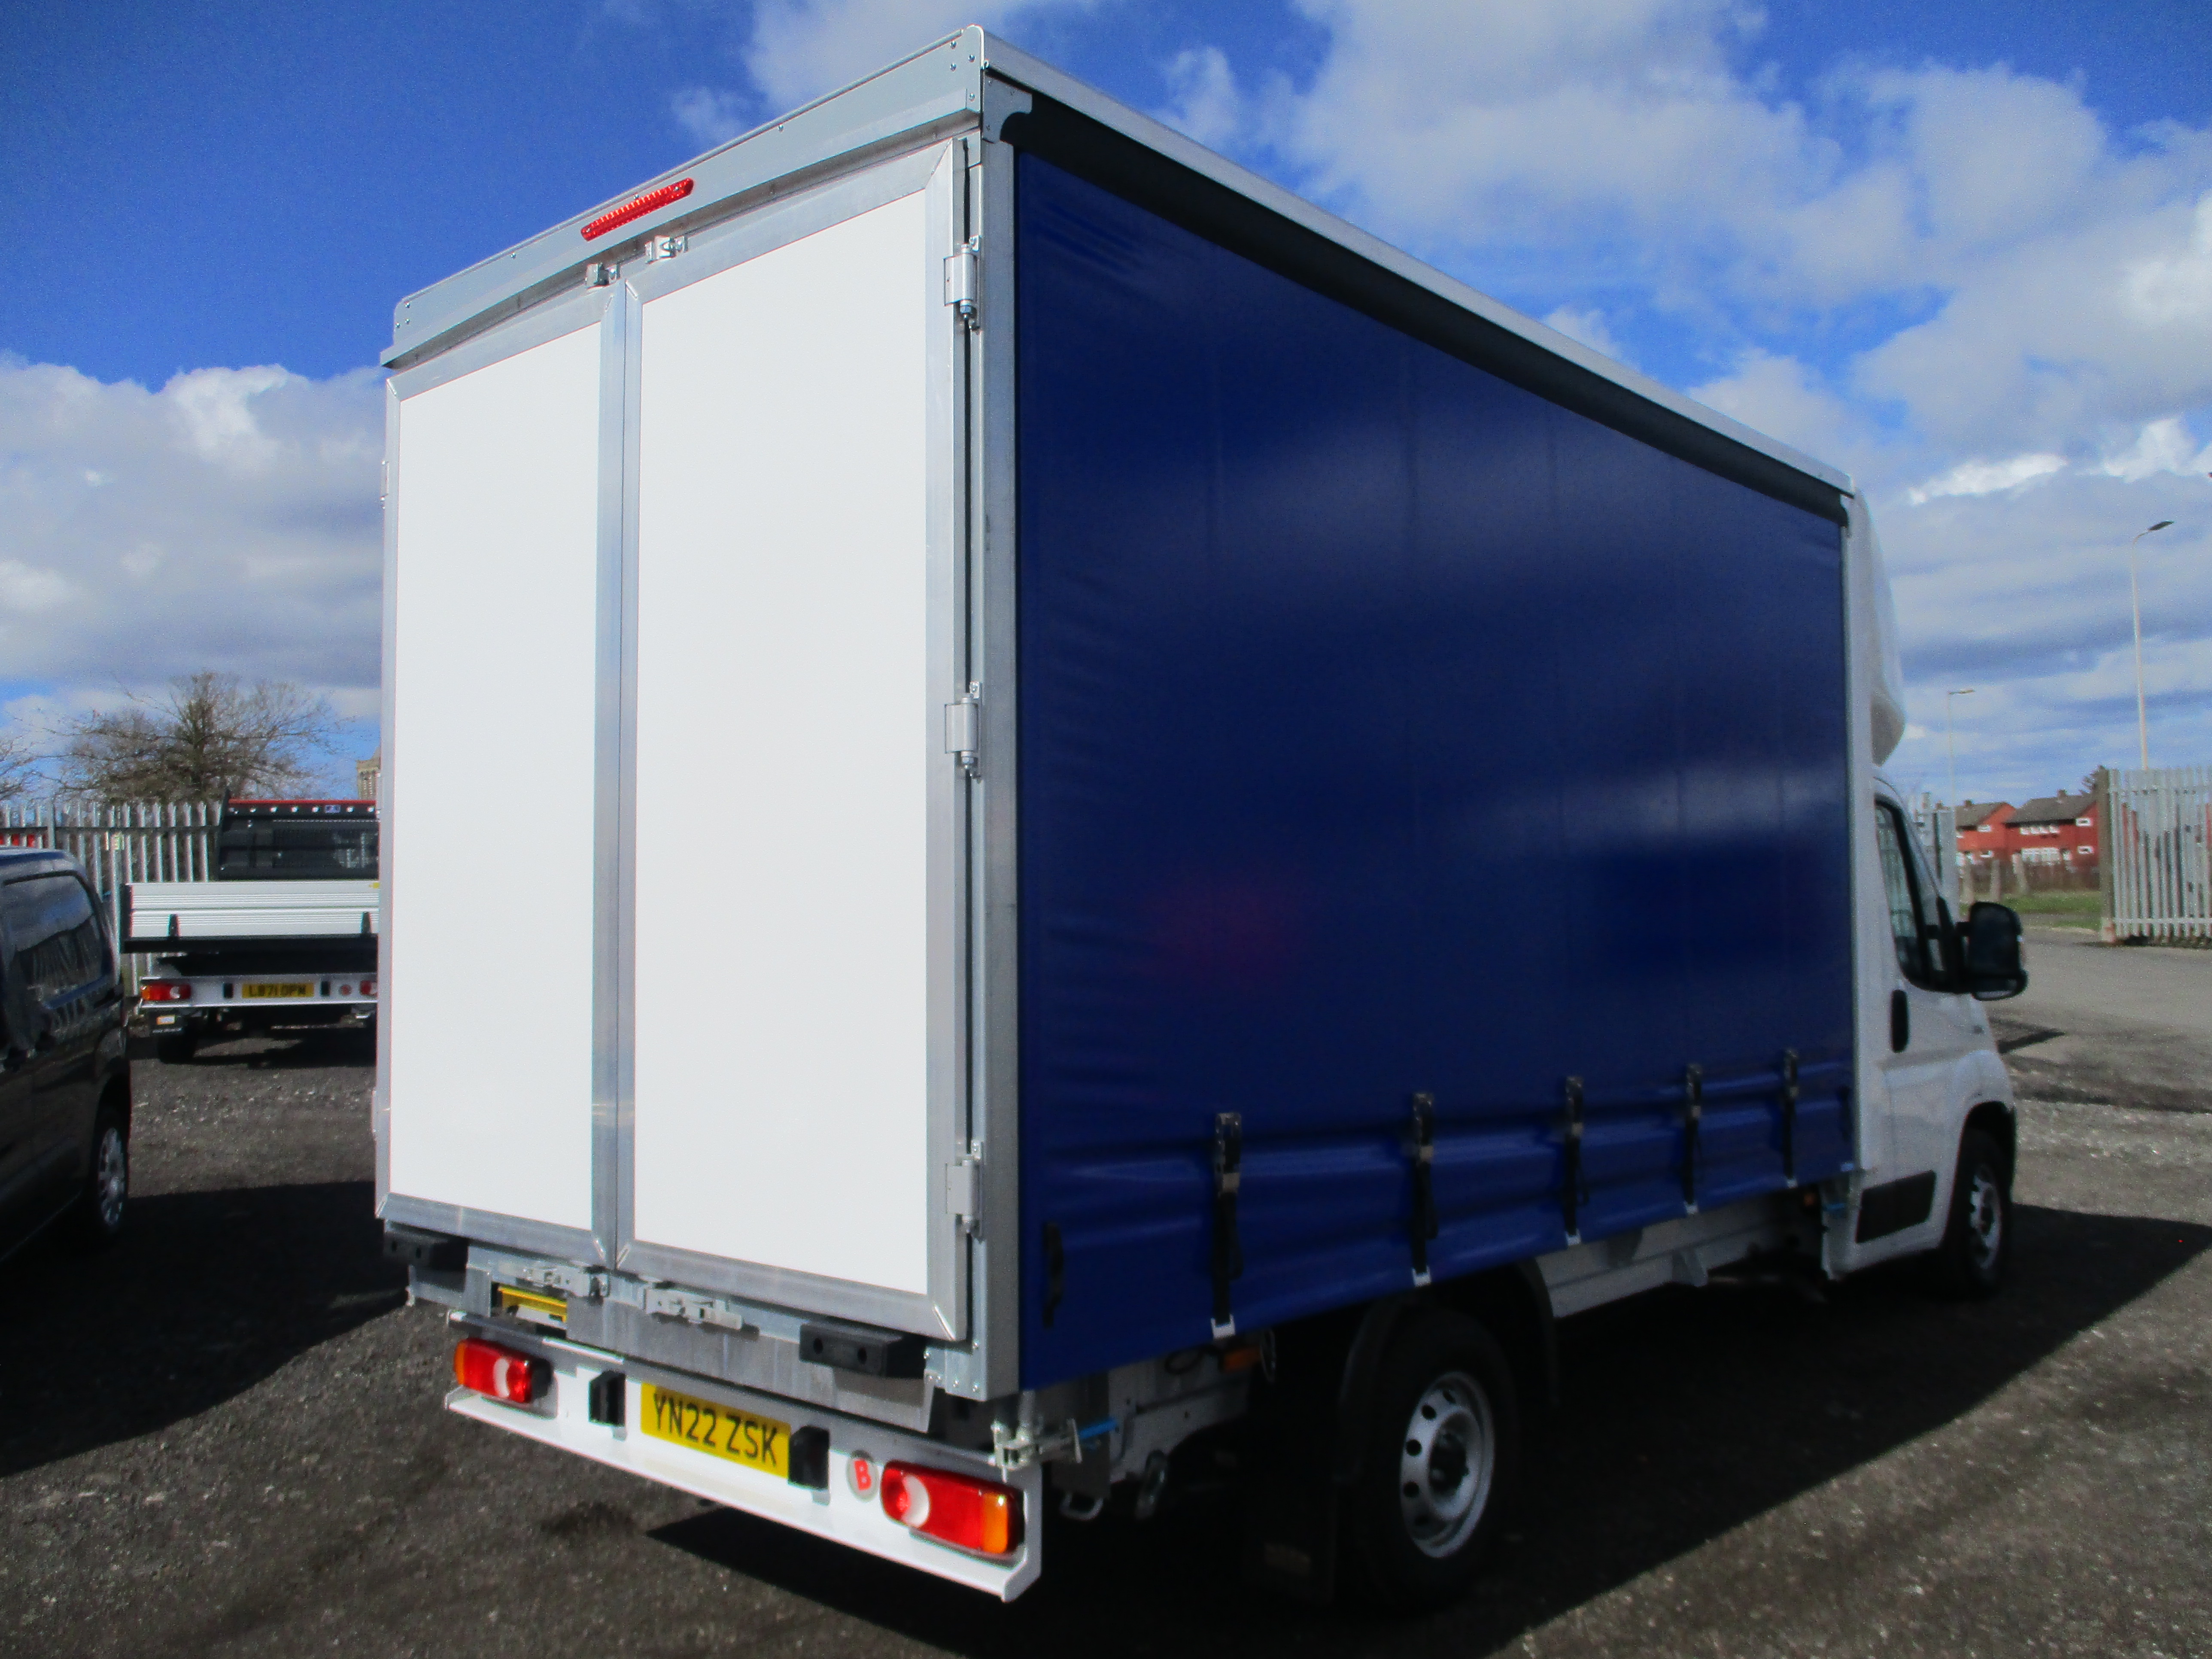 Fiat Ducato Curtainsider Series 8 with Barn Doors 2.3 Diesel 140PS, BIG SPEC including AIR CON ( £1,400 OFF )